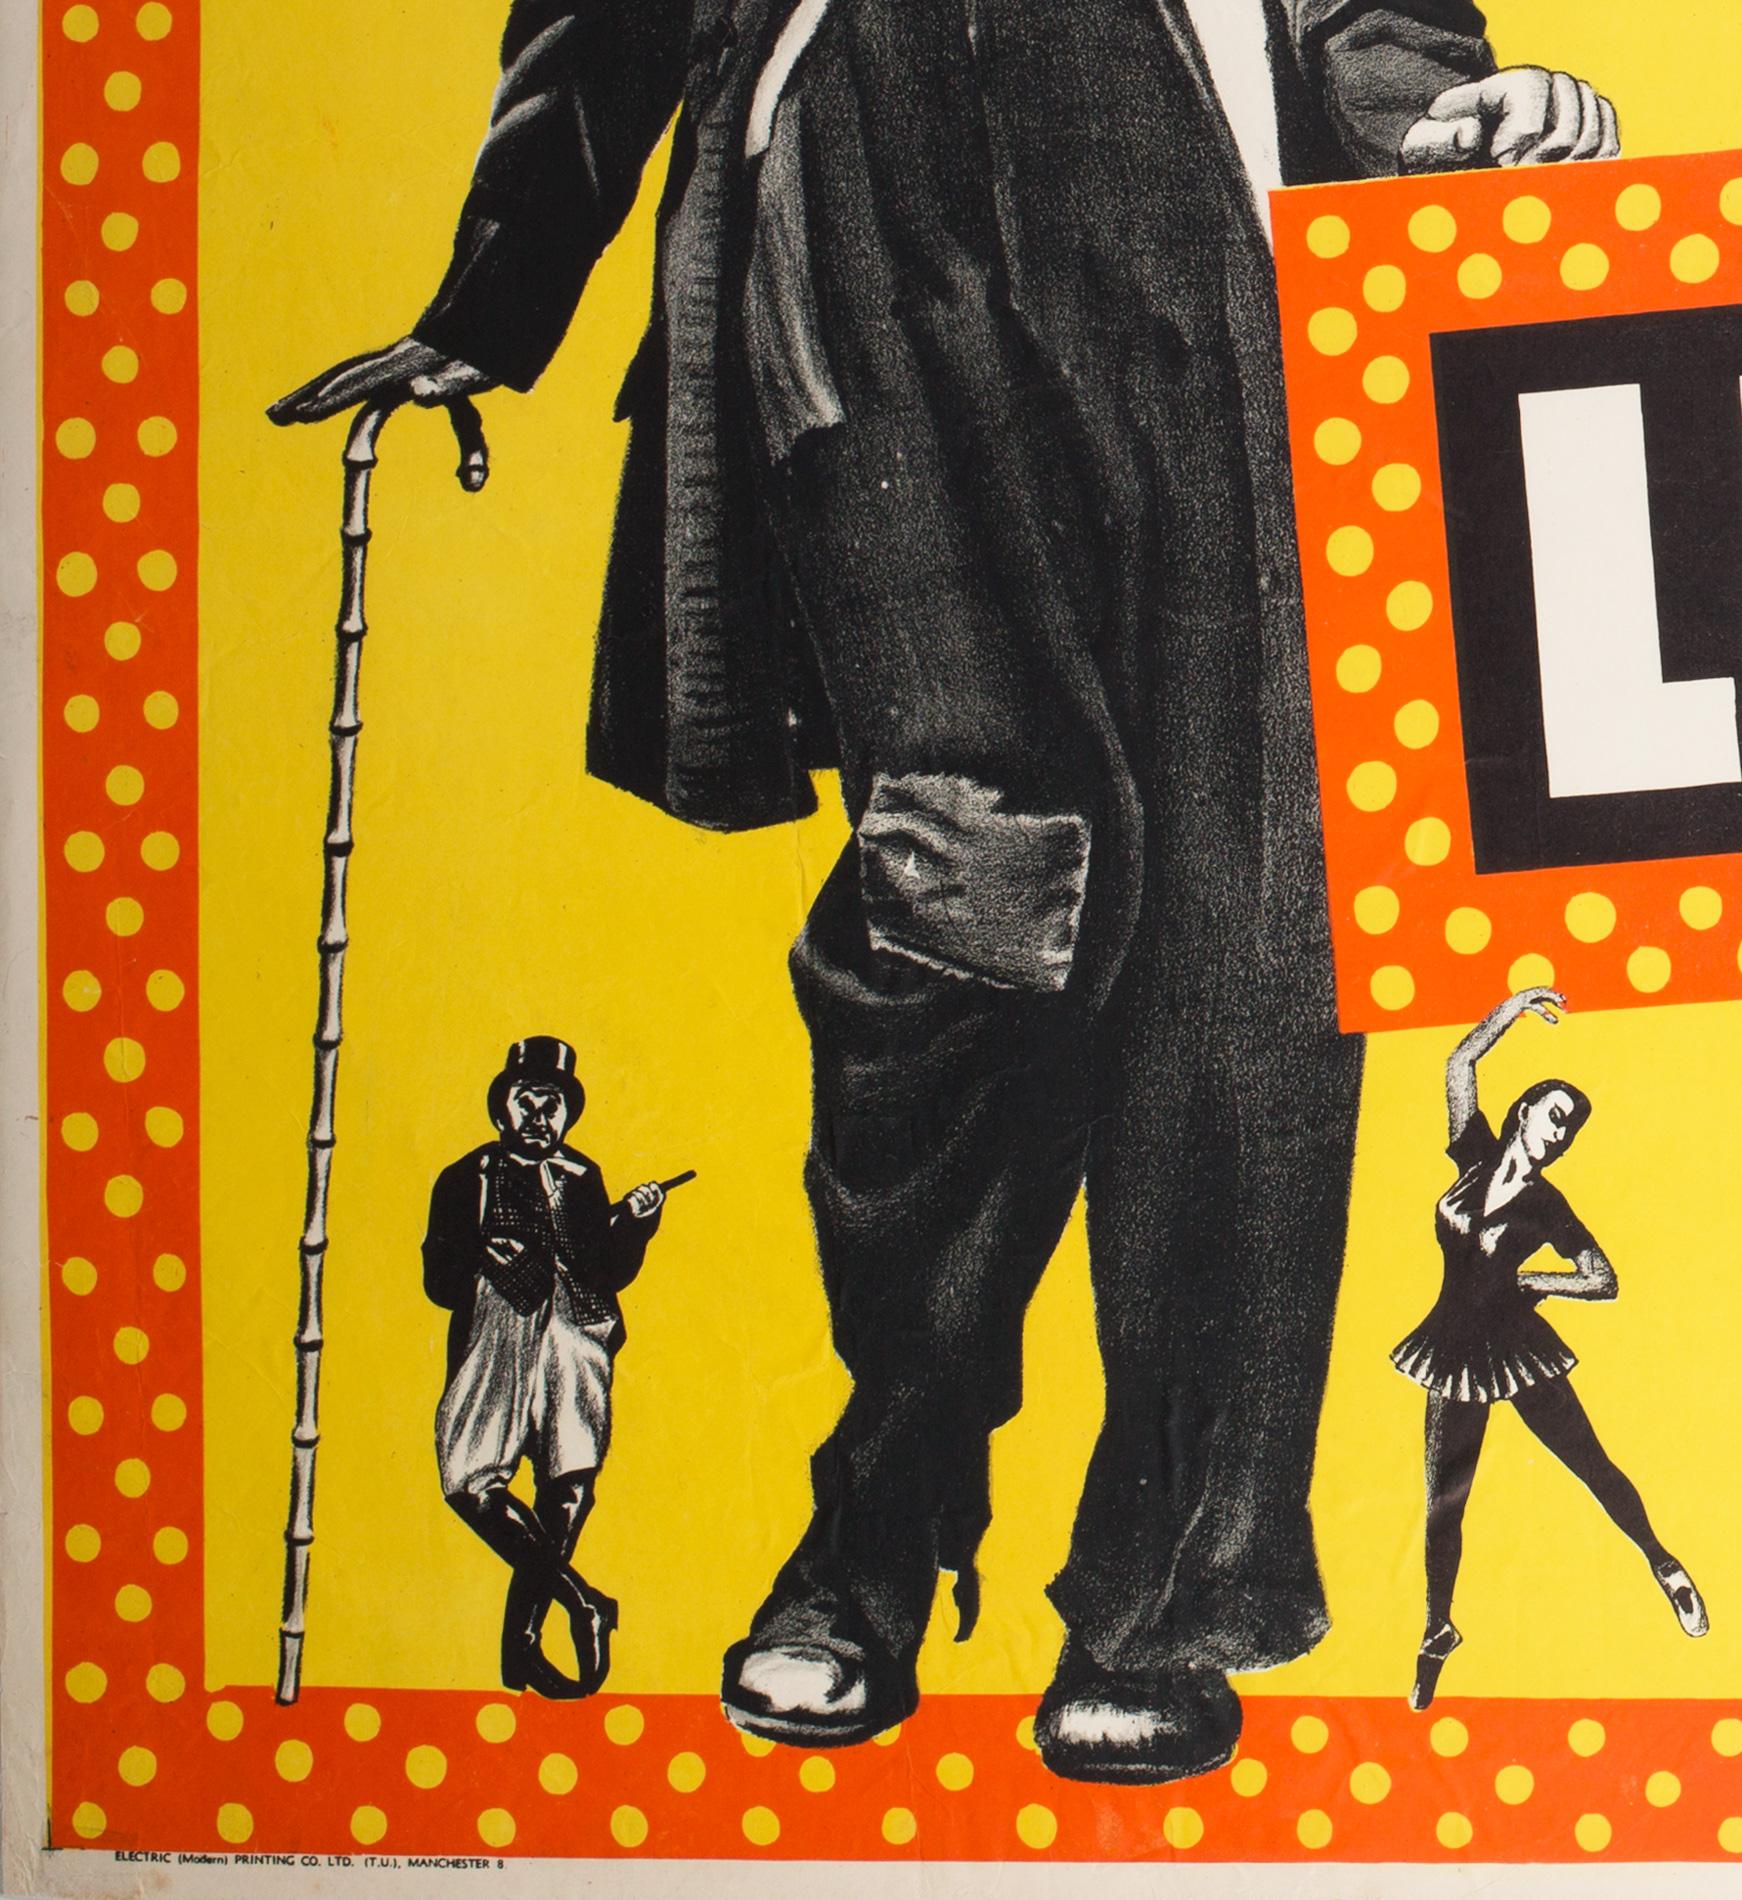 20th Century Limelight R1950s UK Quad Charles Chaplin Film Poster For Sale